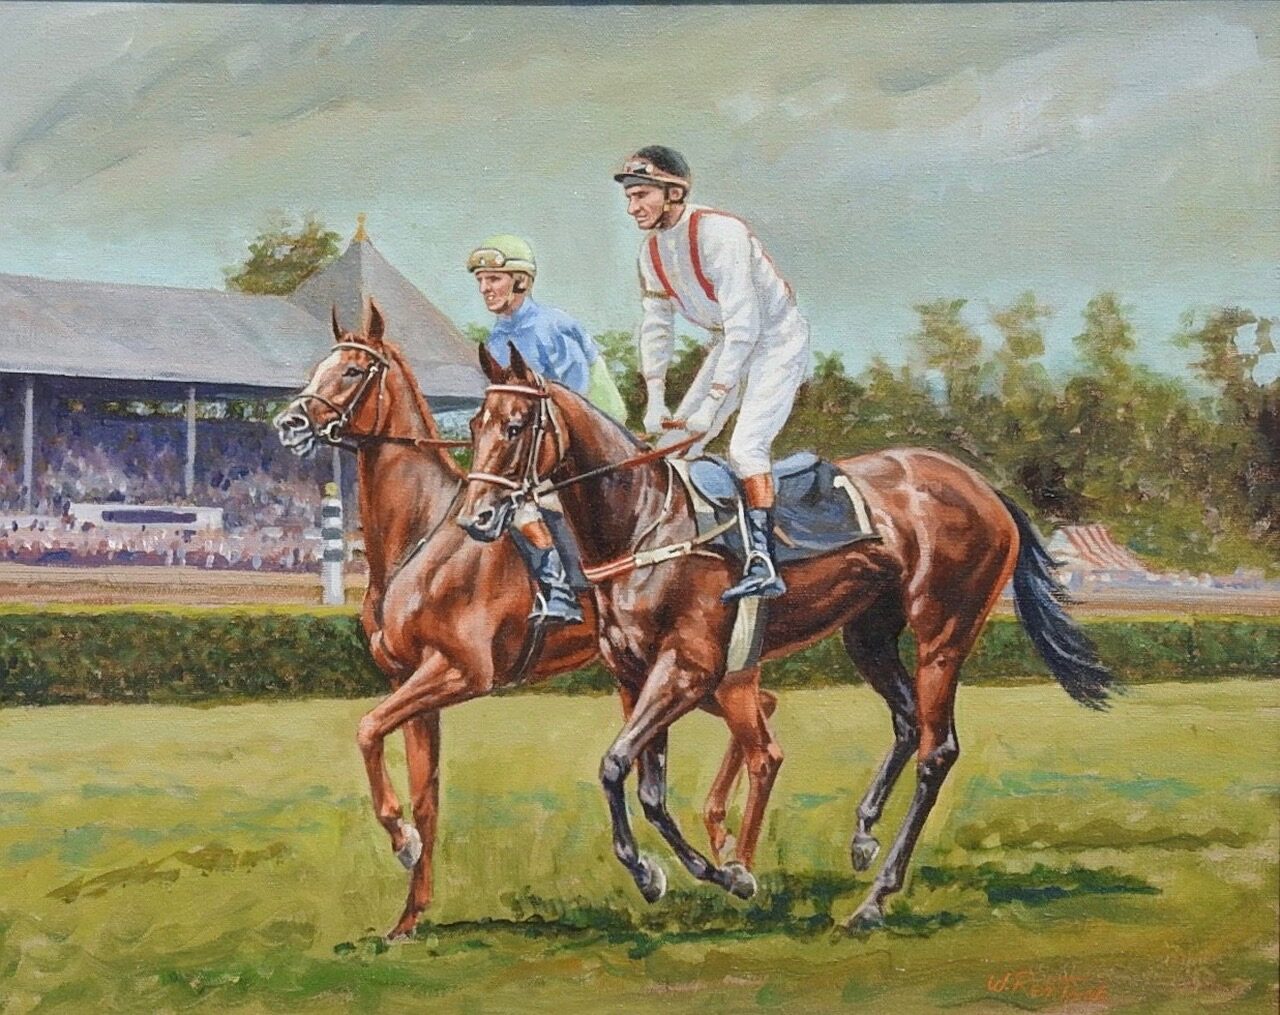 Two jockeys on horses in front of a stadium.